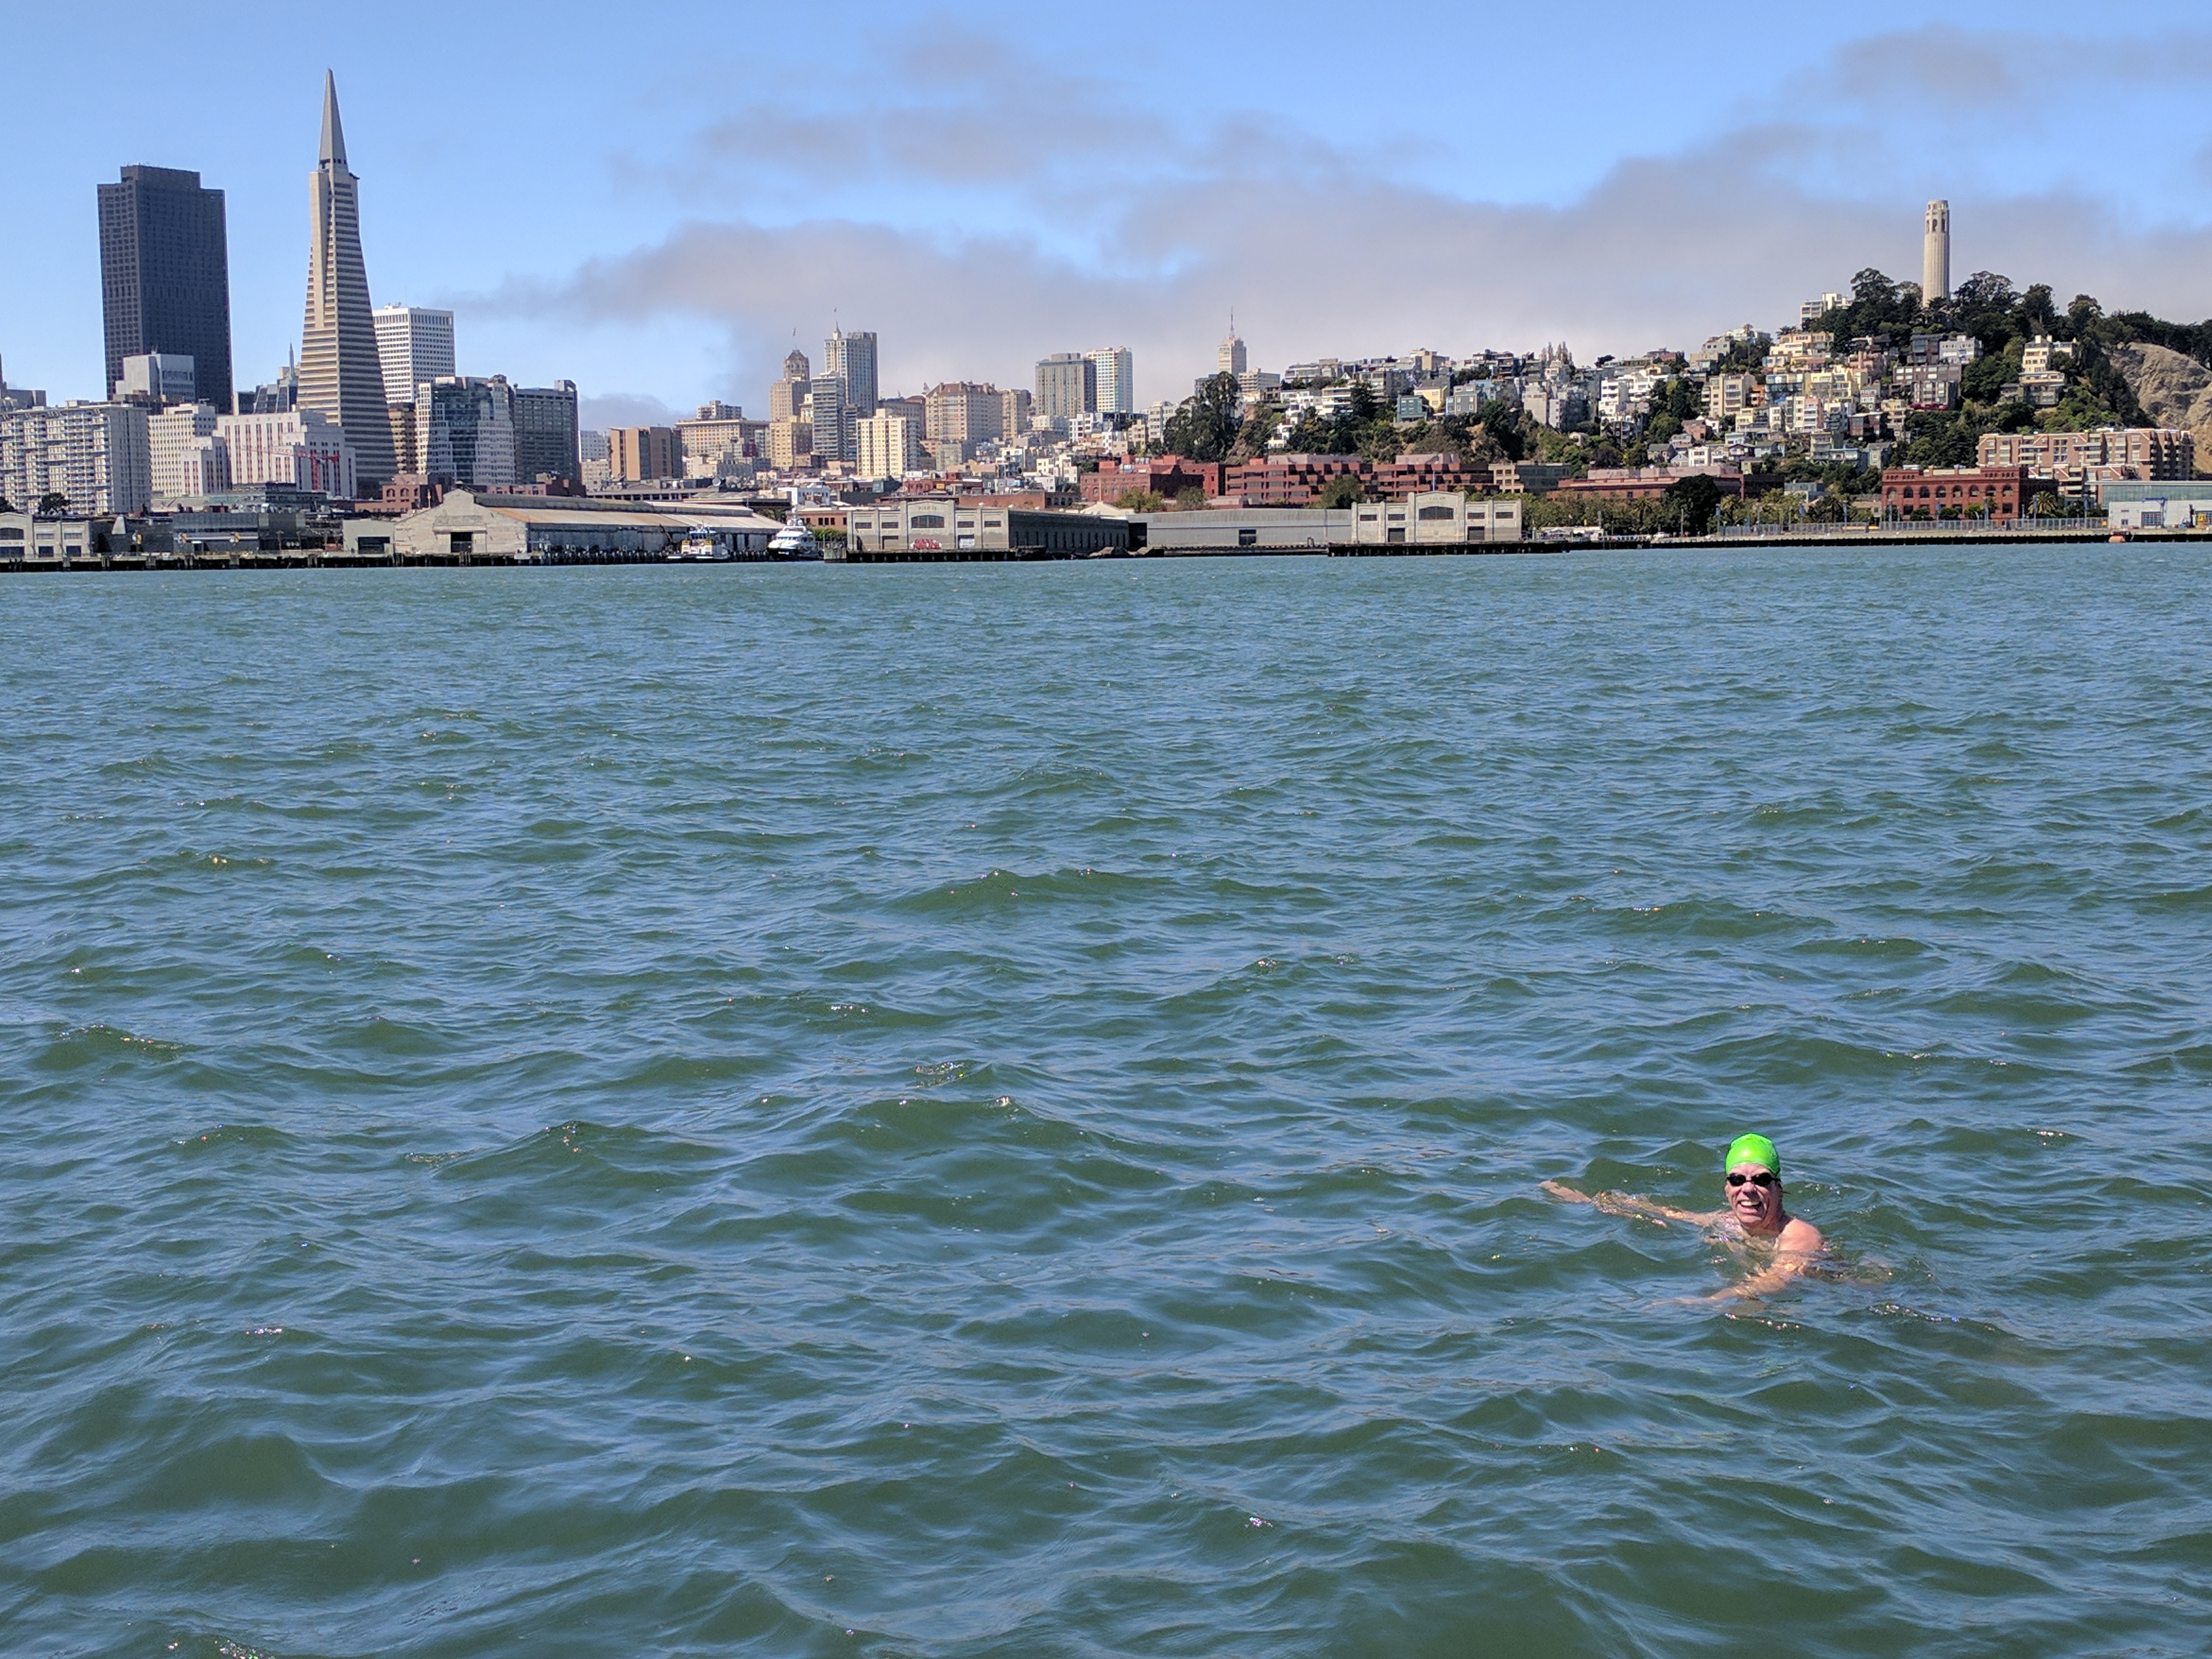 A swimmer in the water with the San Francisco skyline, Transamerica Pyramid on the left and Coit Tower on the right.